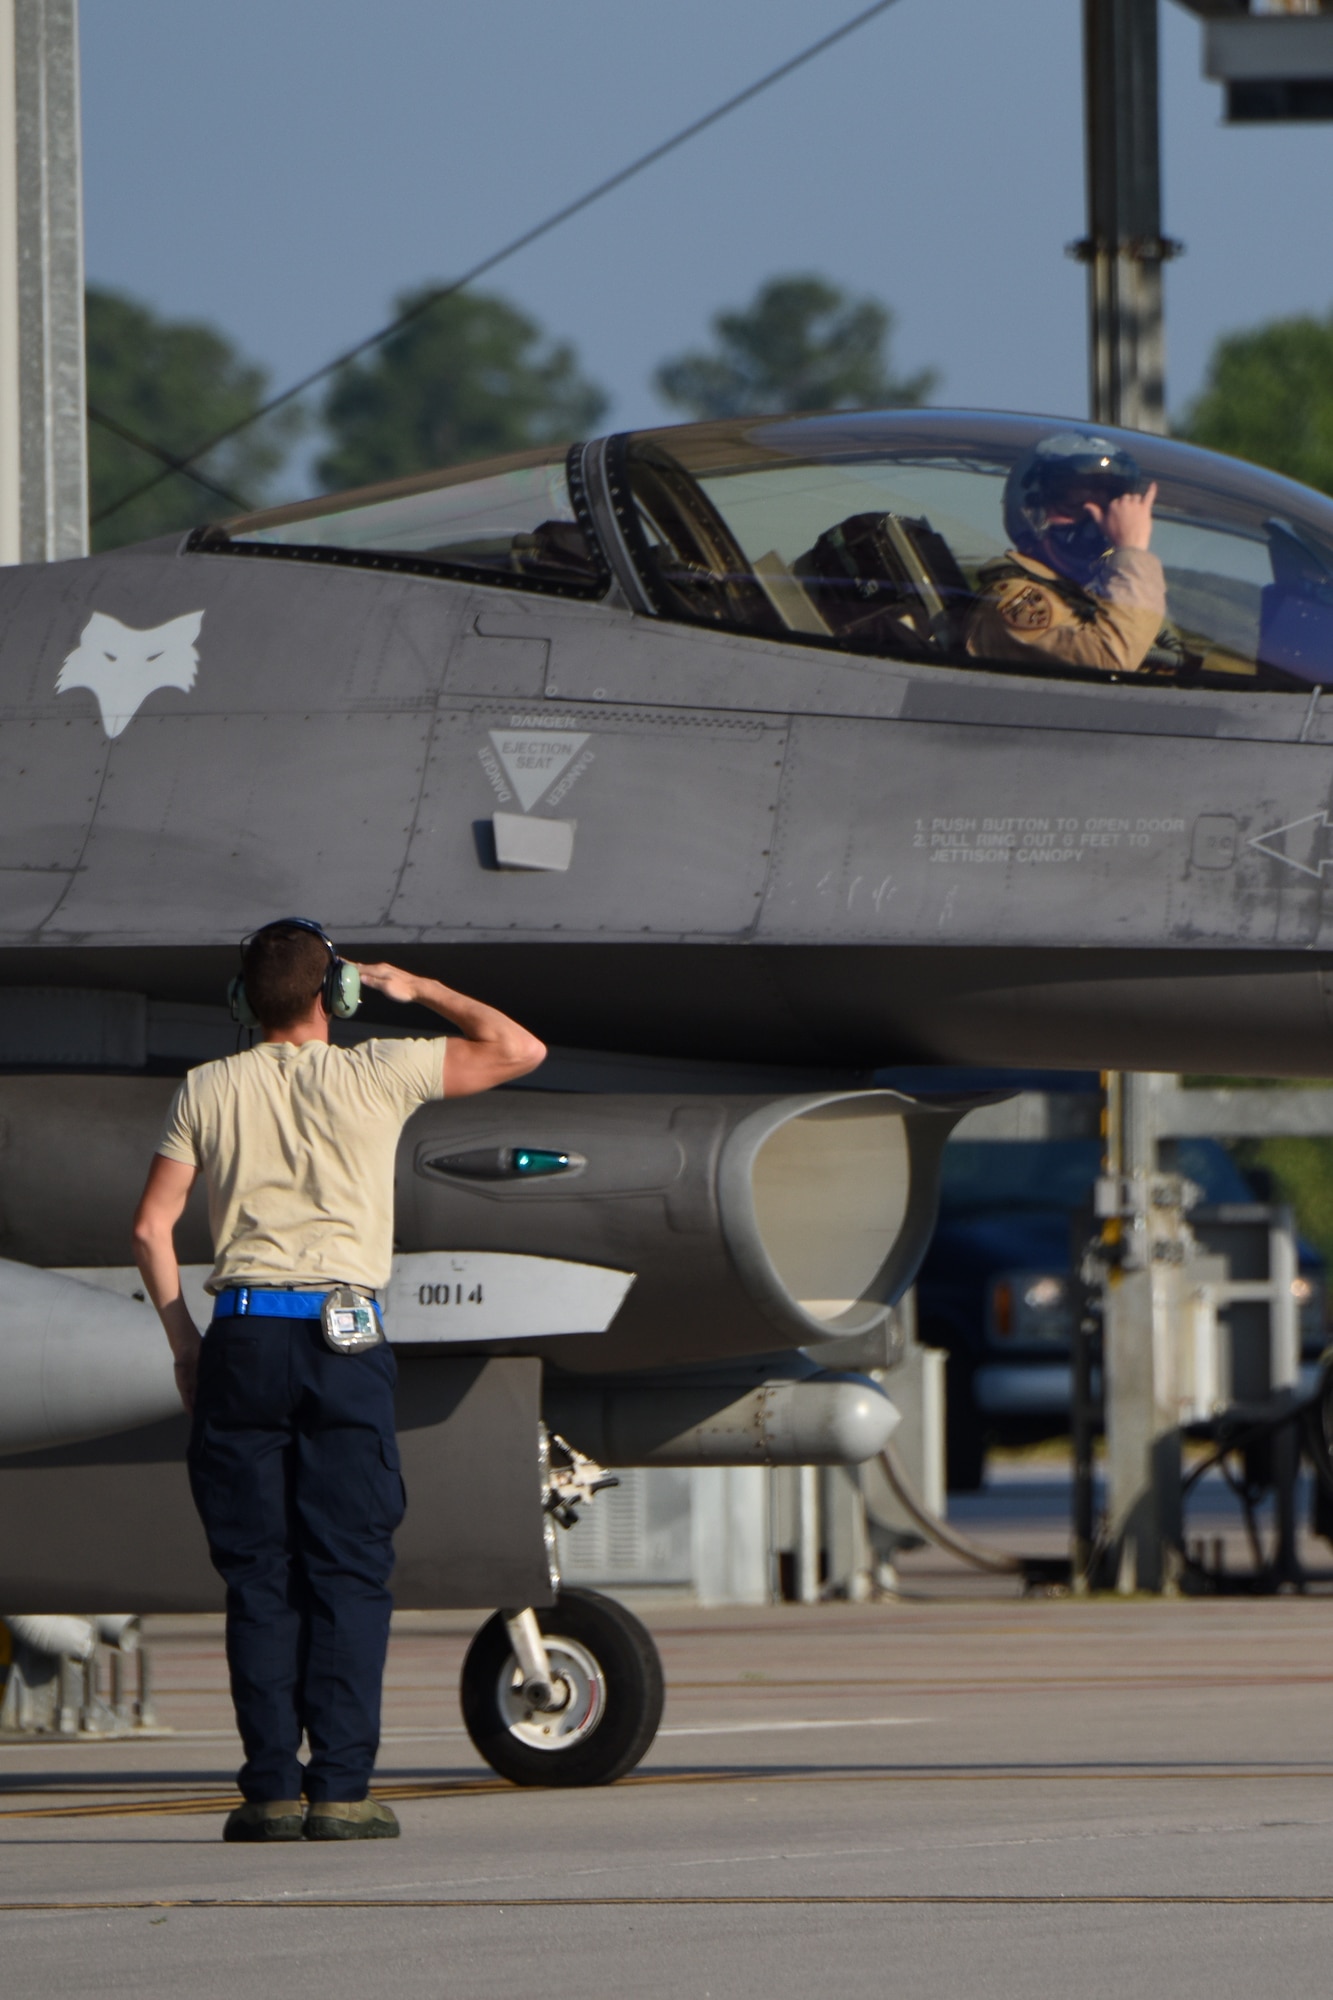 The 169th Fighter Wing deploys to Southwest Asia in support of Operation Inherent Resolve.